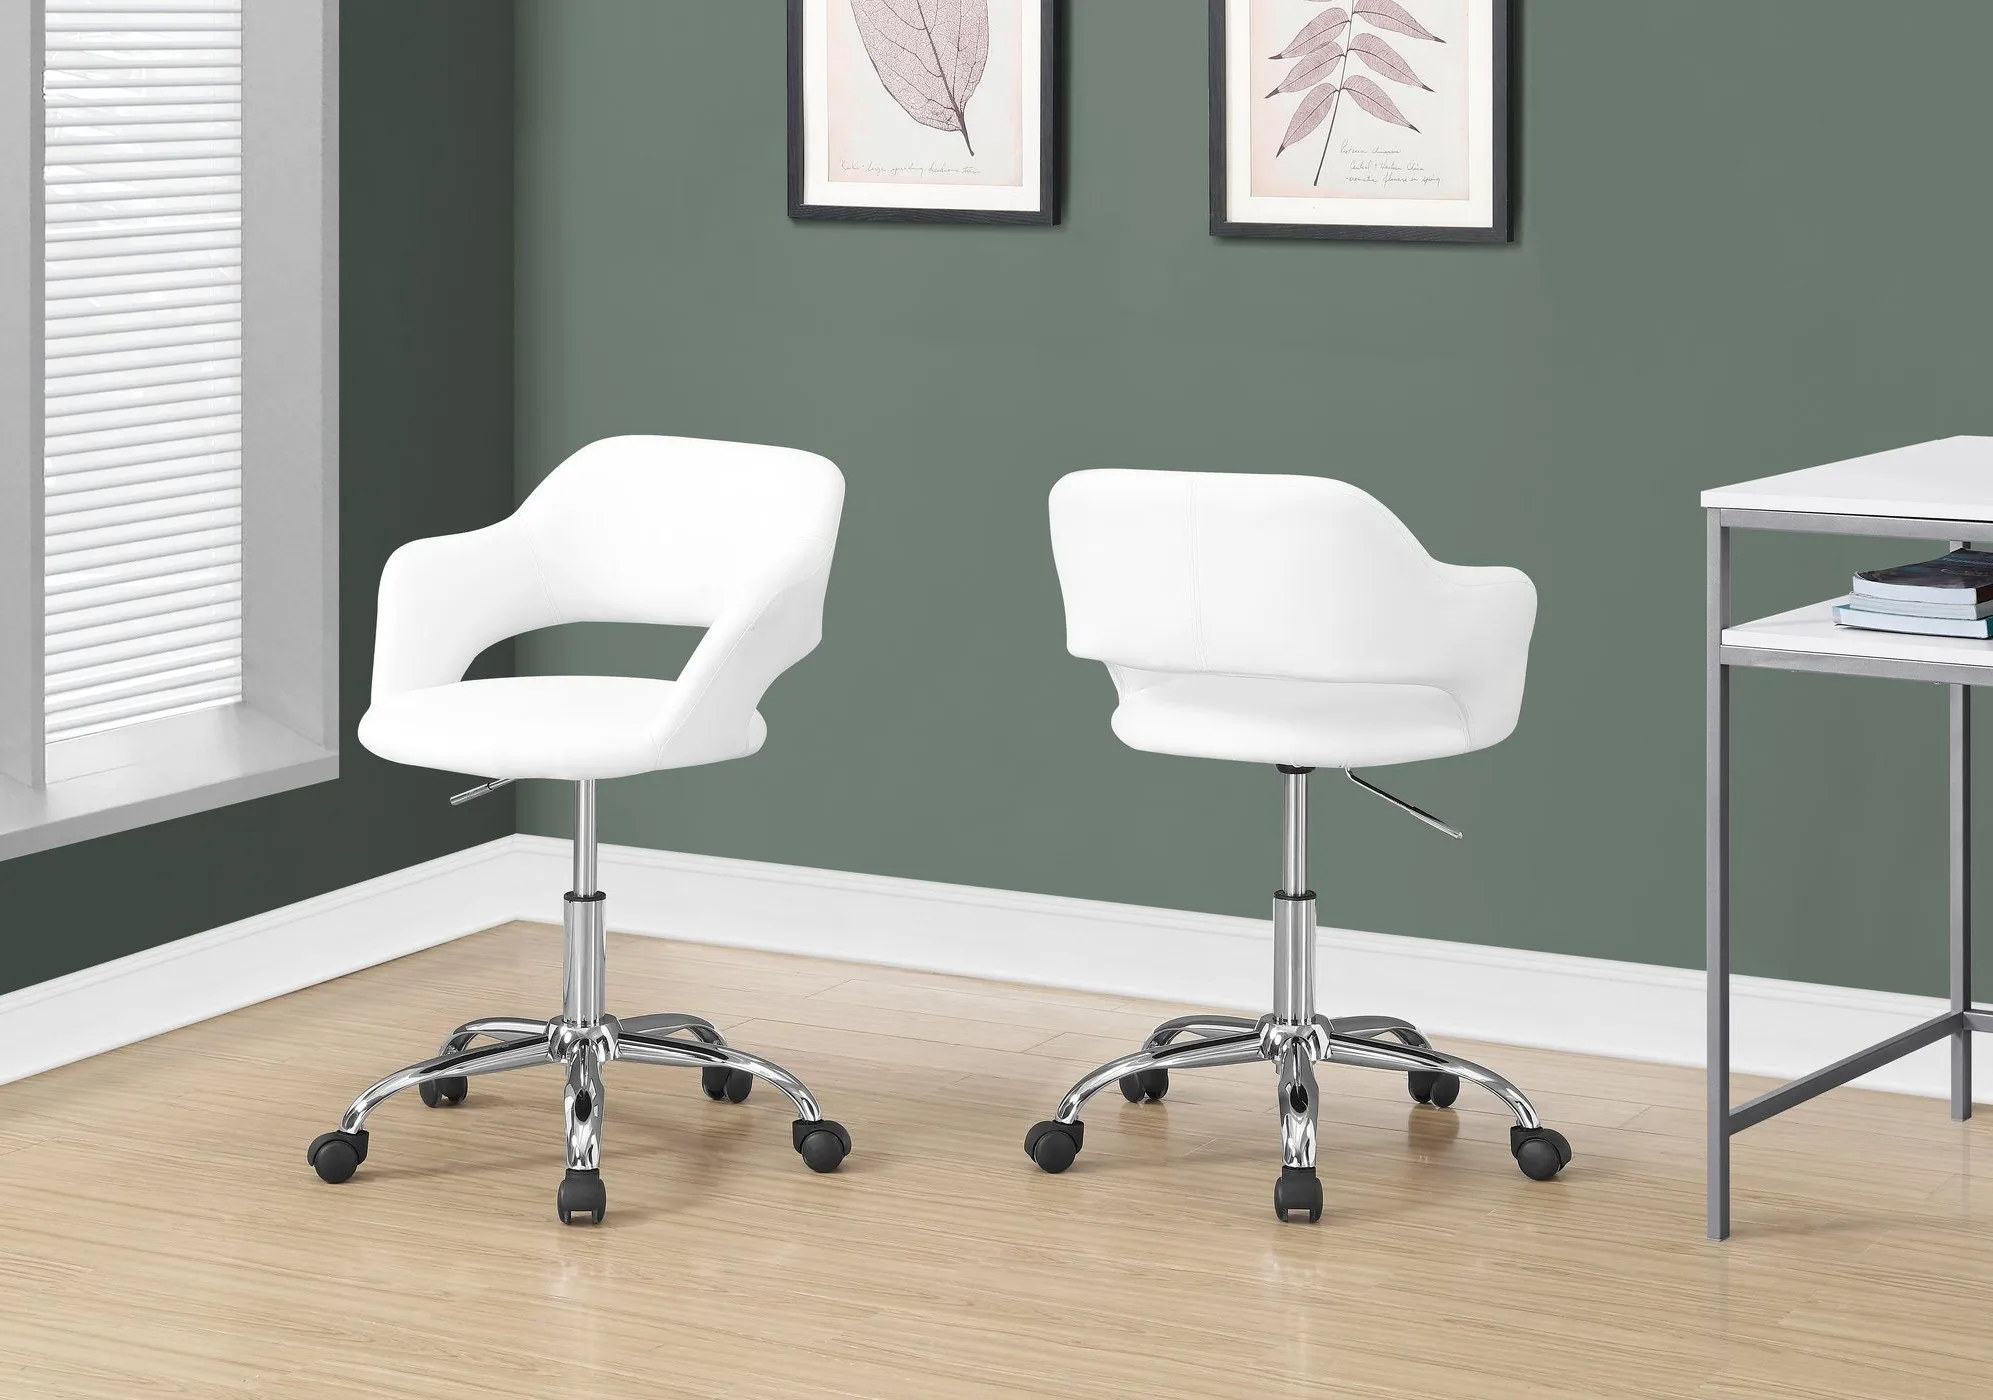 Office Chair, Adjustable Height, Swivel, Ergonomic, Armrests, Computer Desk, Work, Metal, Pu Leather Look, White, Chrome, Contemporary, Modern